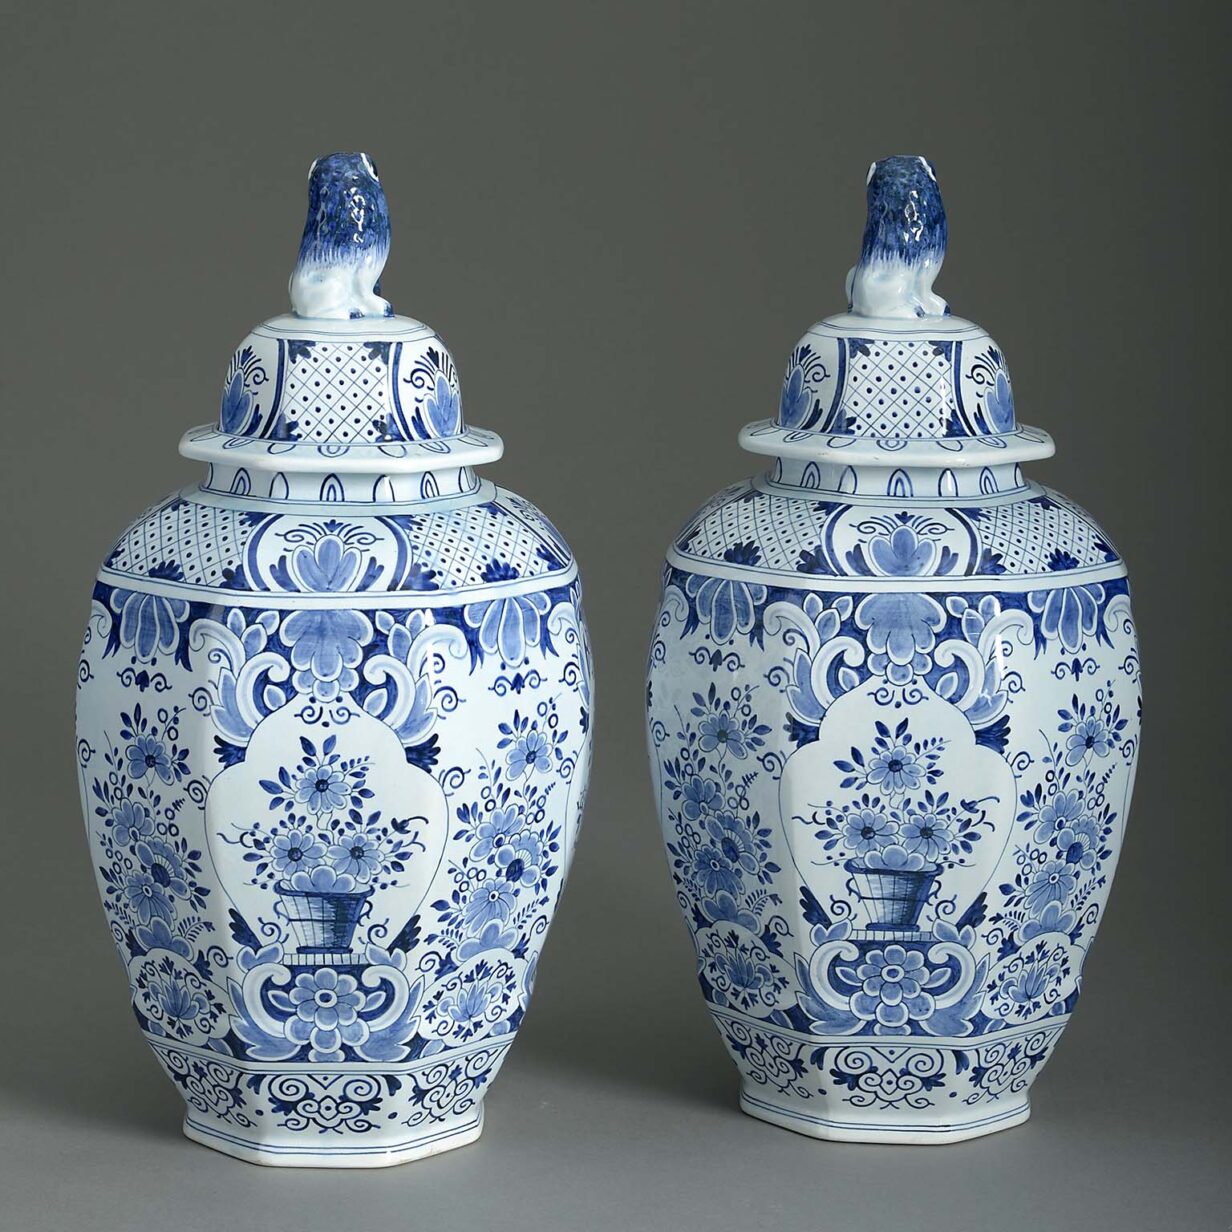 Pair of blue & white glazed delft pottery vases and covers